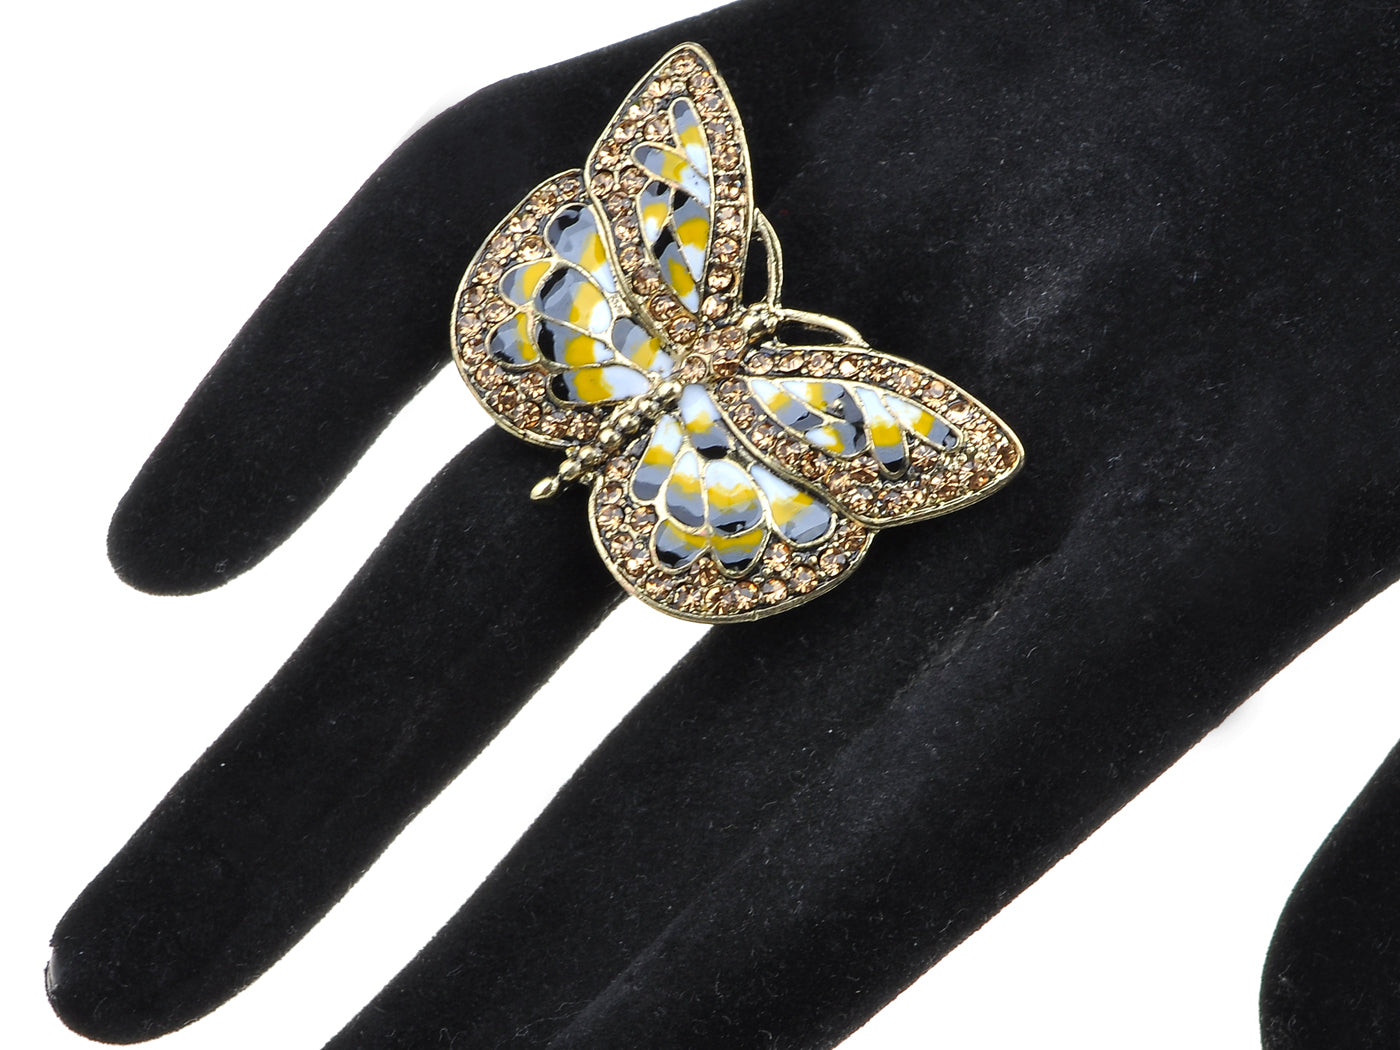 Antique Topaz Yellow Grey Butterfly Insect Ring